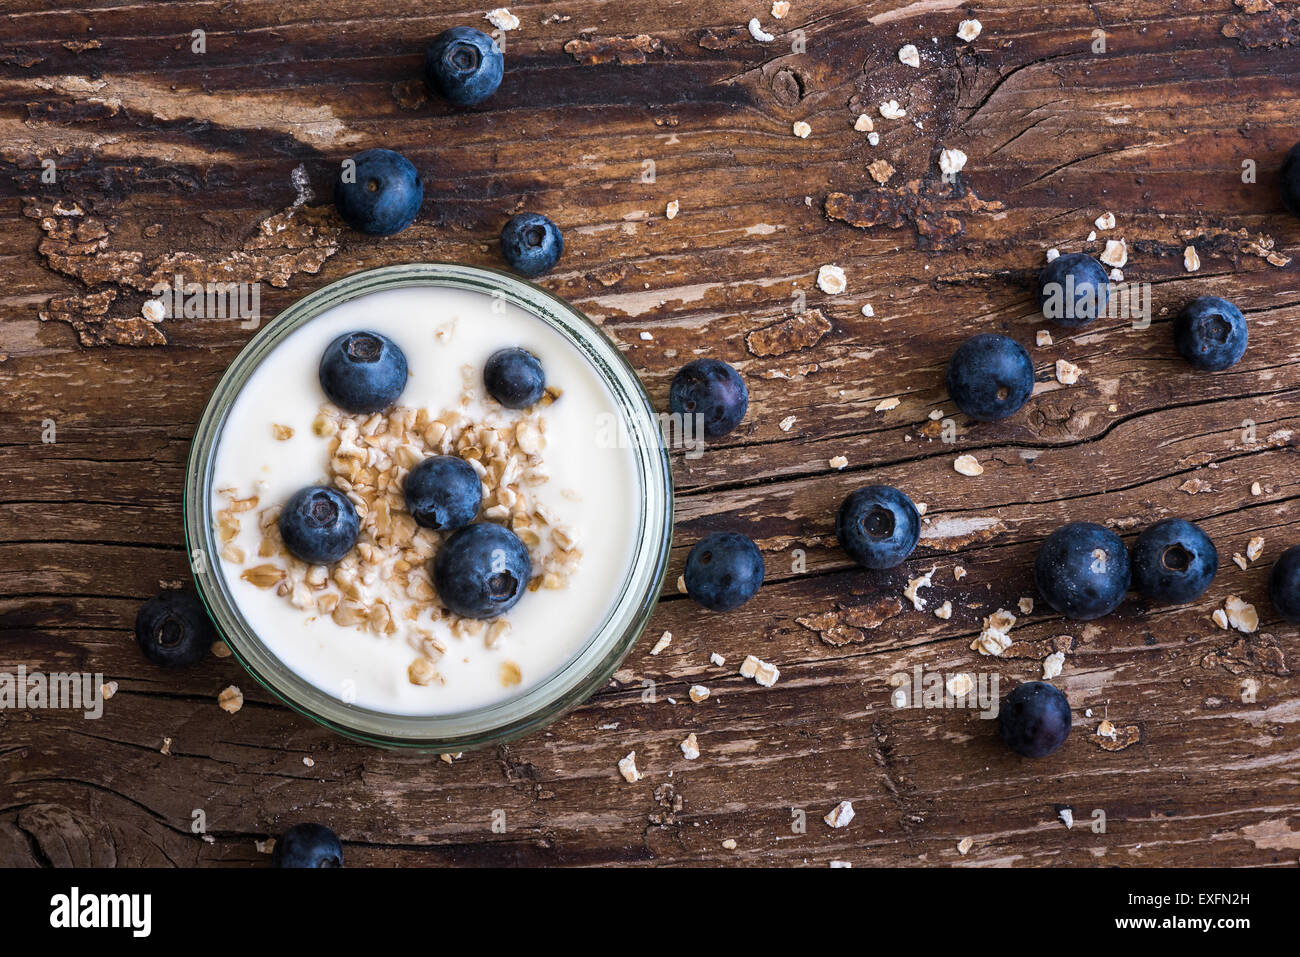 Serving of Yogurt with Whole Fresh Blueberries and Oatmeal on Old Rustic Wooden Table Stock Photo